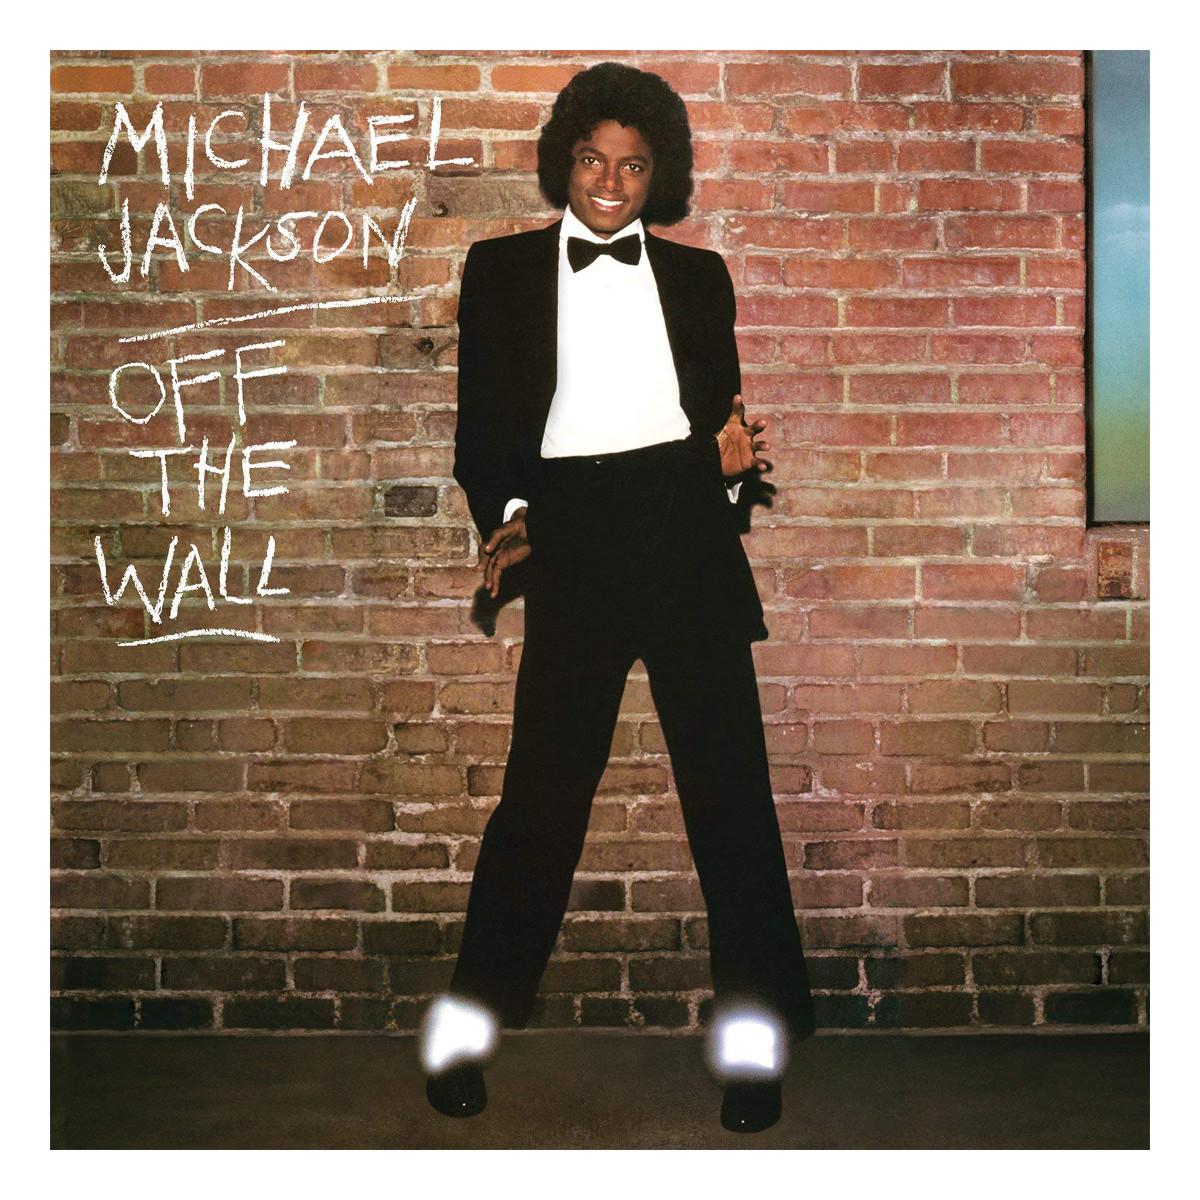 off the wall tour